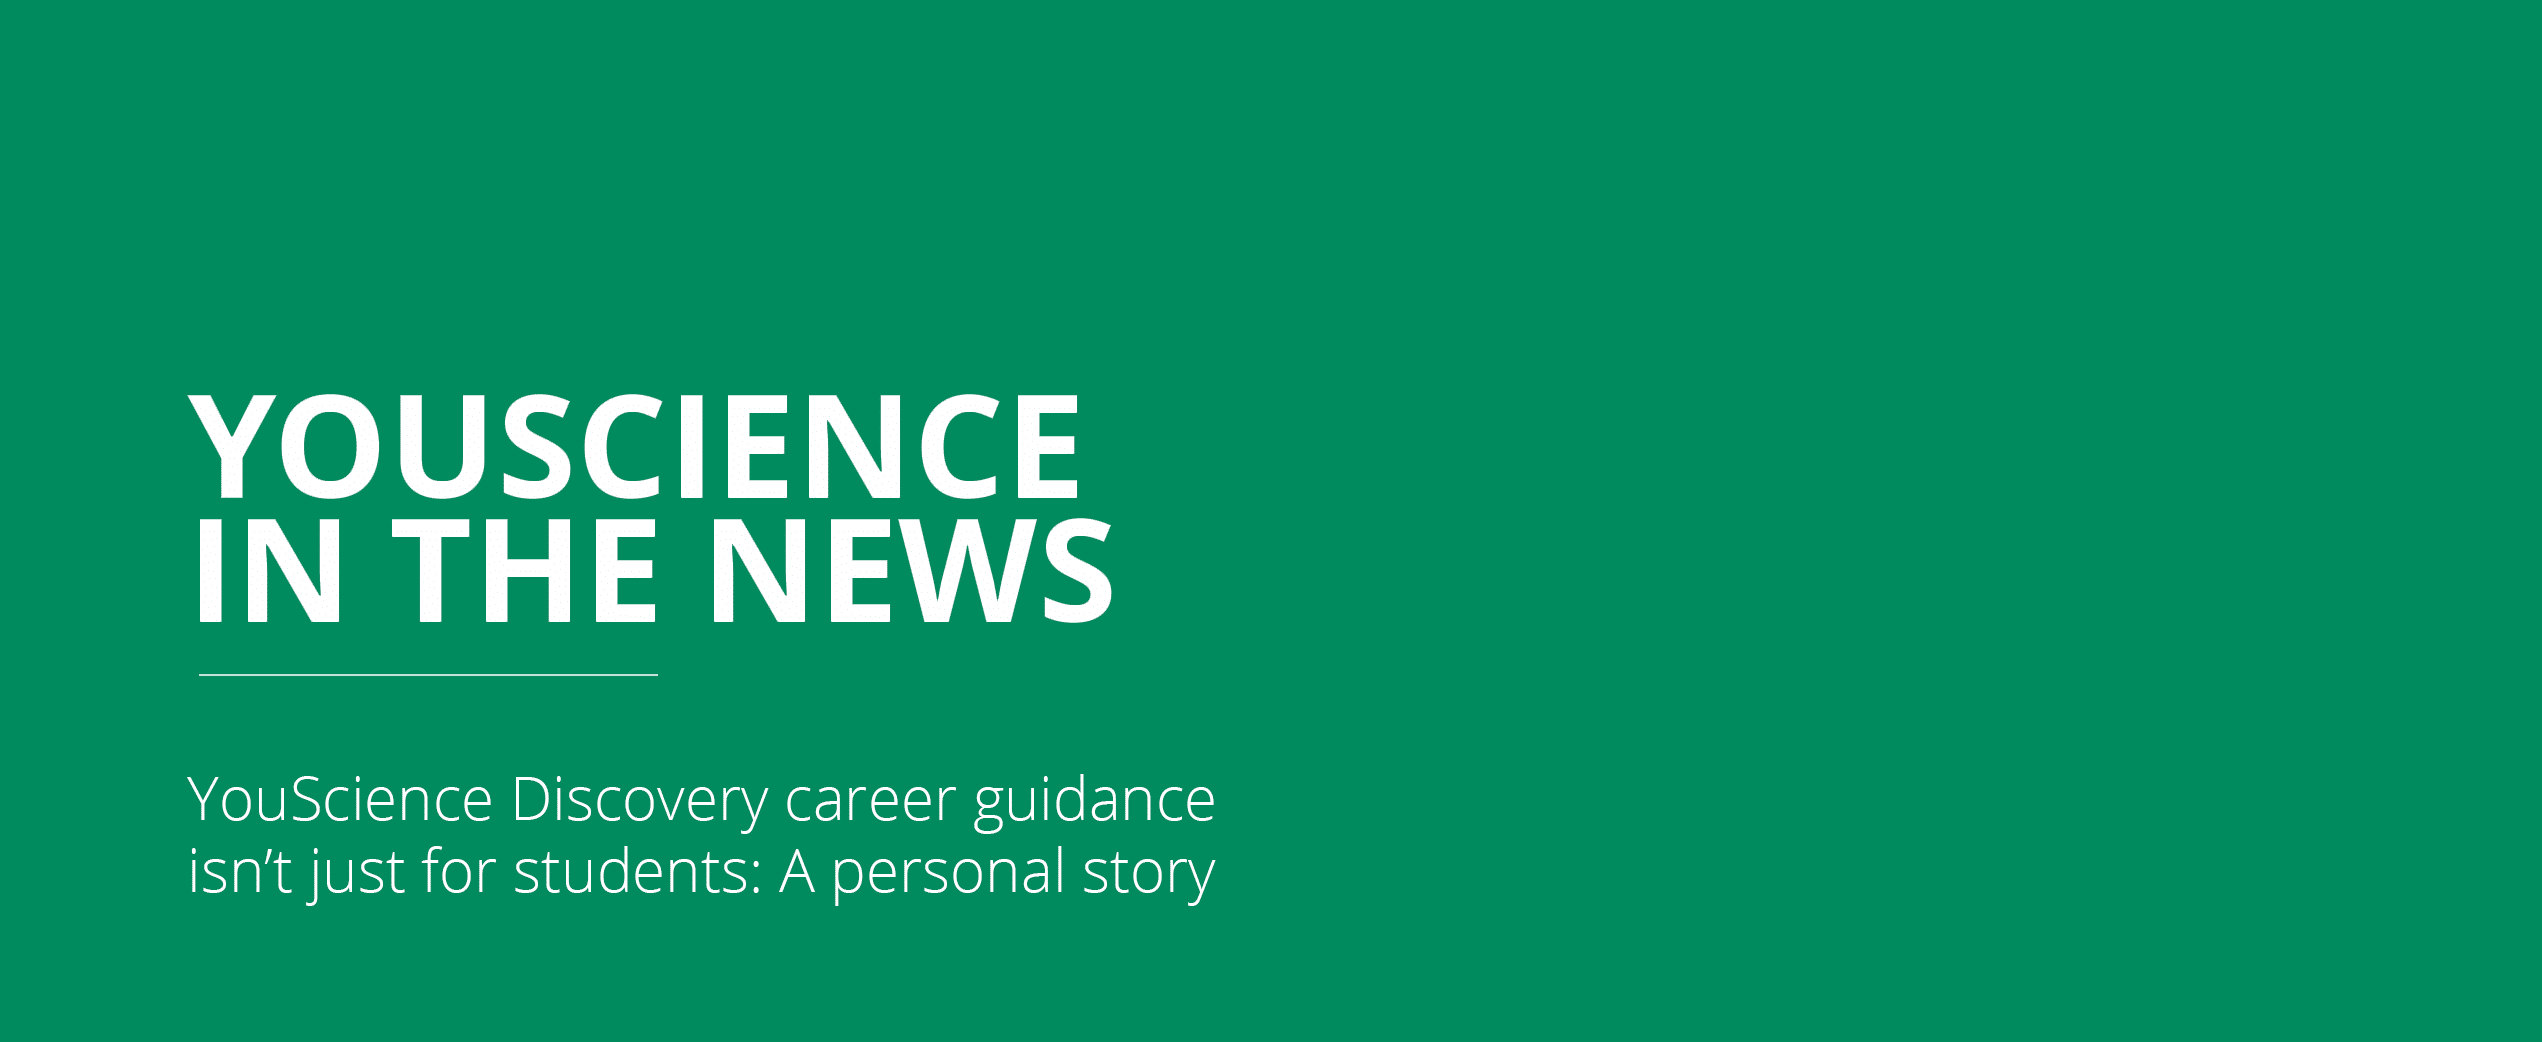 YouScience In the News: YouScience Discovery career guidance is not just for students: A personal story